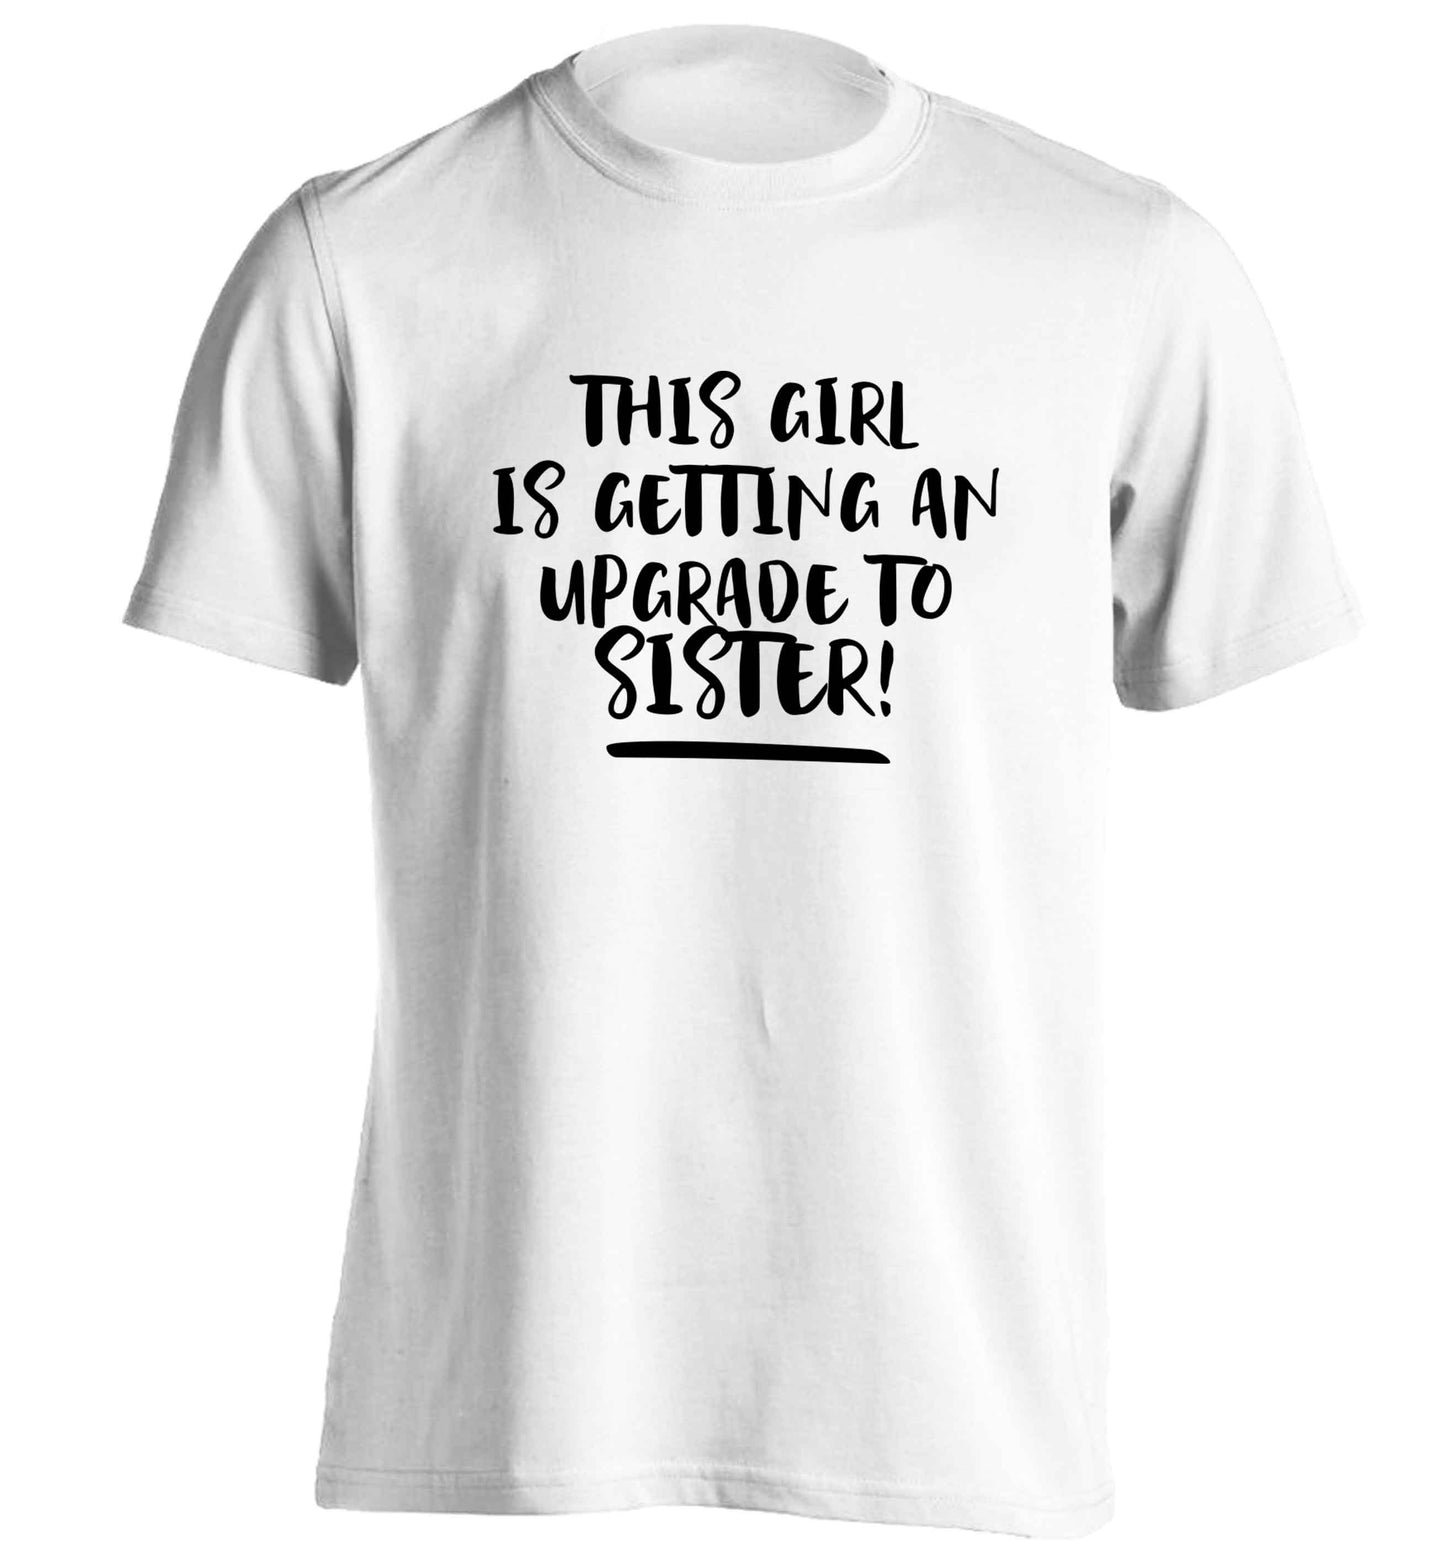 This girl is getting an upgrade to sister! adults unisex white Tshirt 2XL